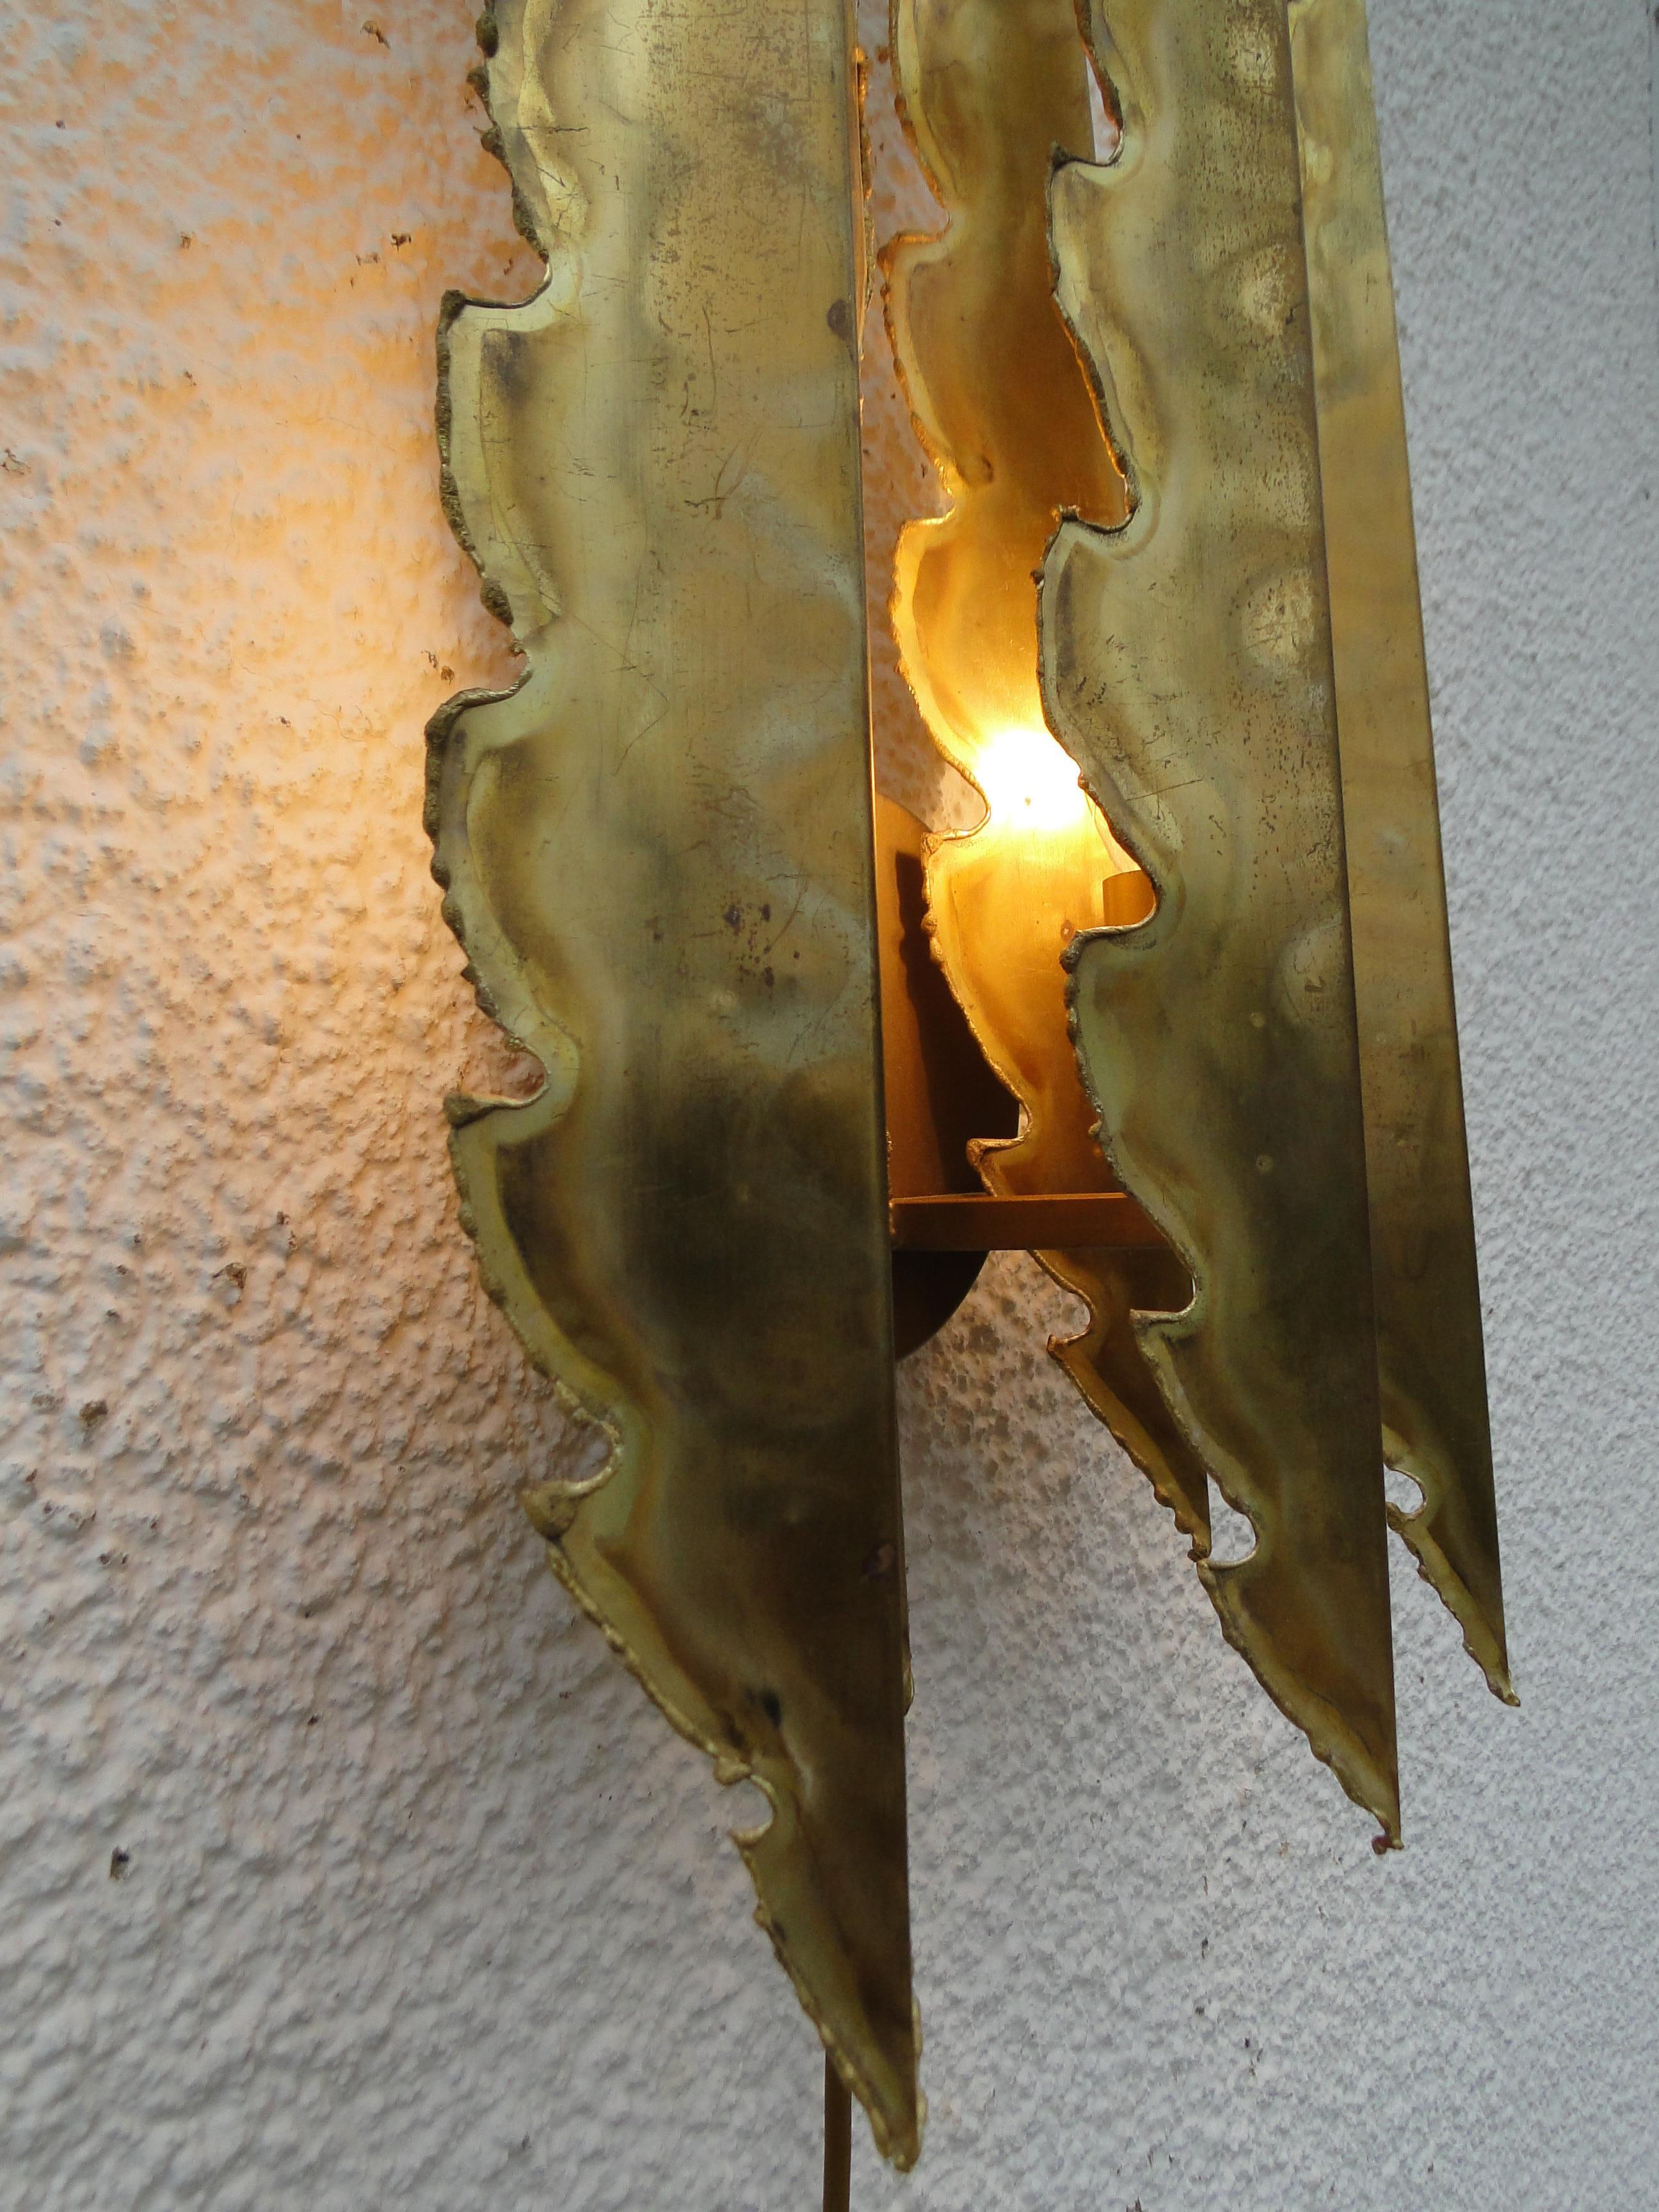 Mid-20th Century Large Brass Wall Lamp by Svend Aage Holm Sorensen 1960 Denmark  For Sale